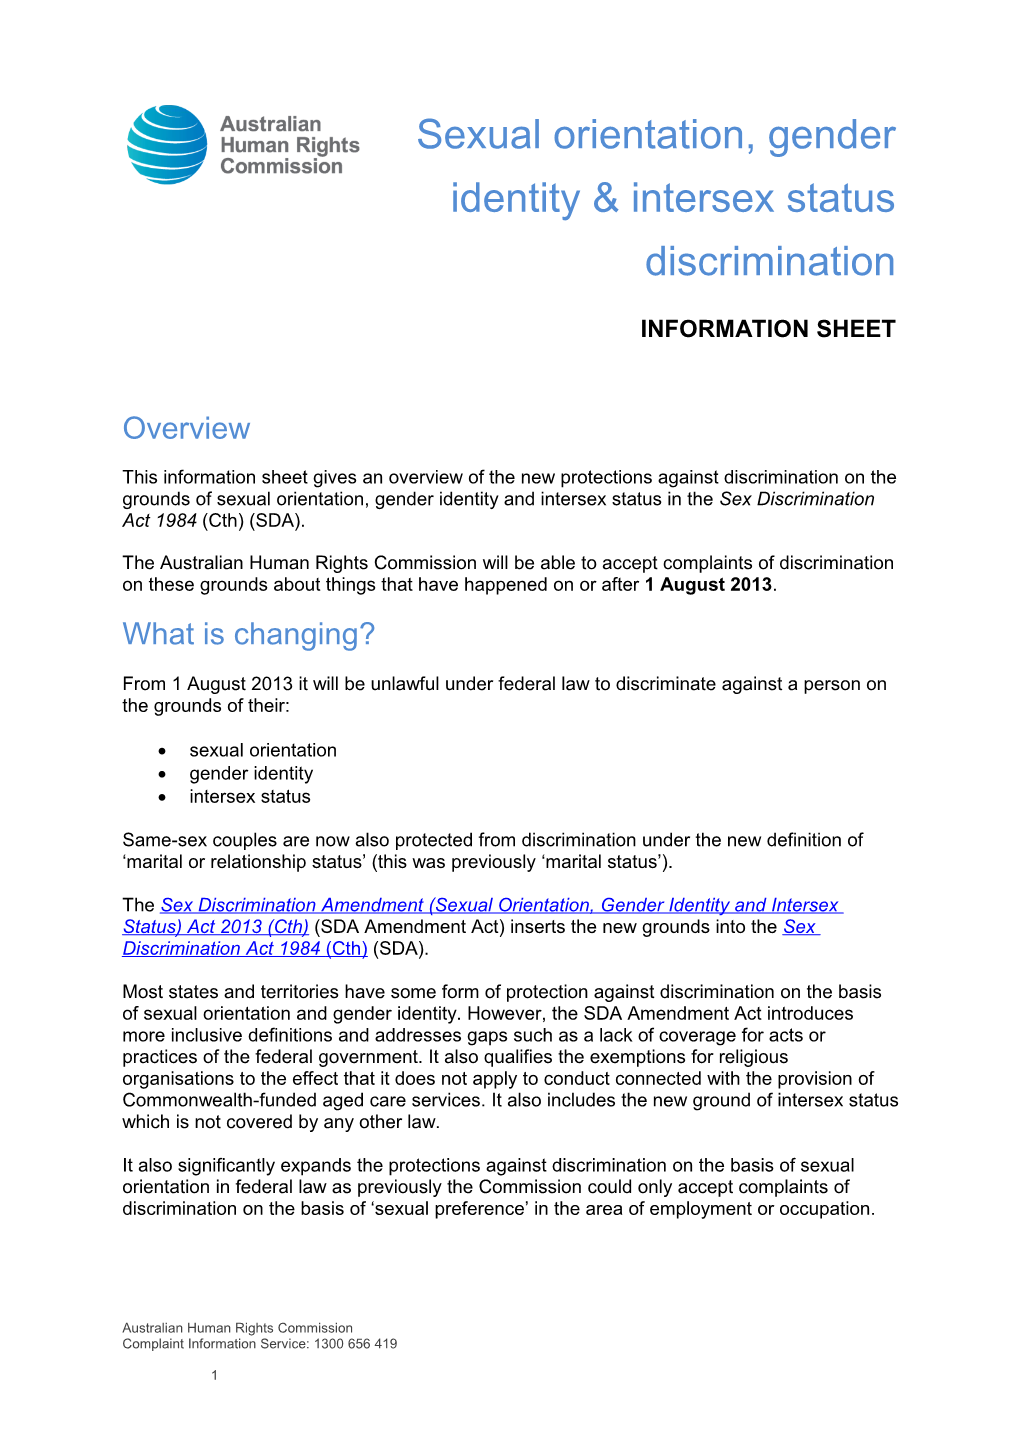 This Information Sheet Gives an Overview of the New Protections Against Discrimination